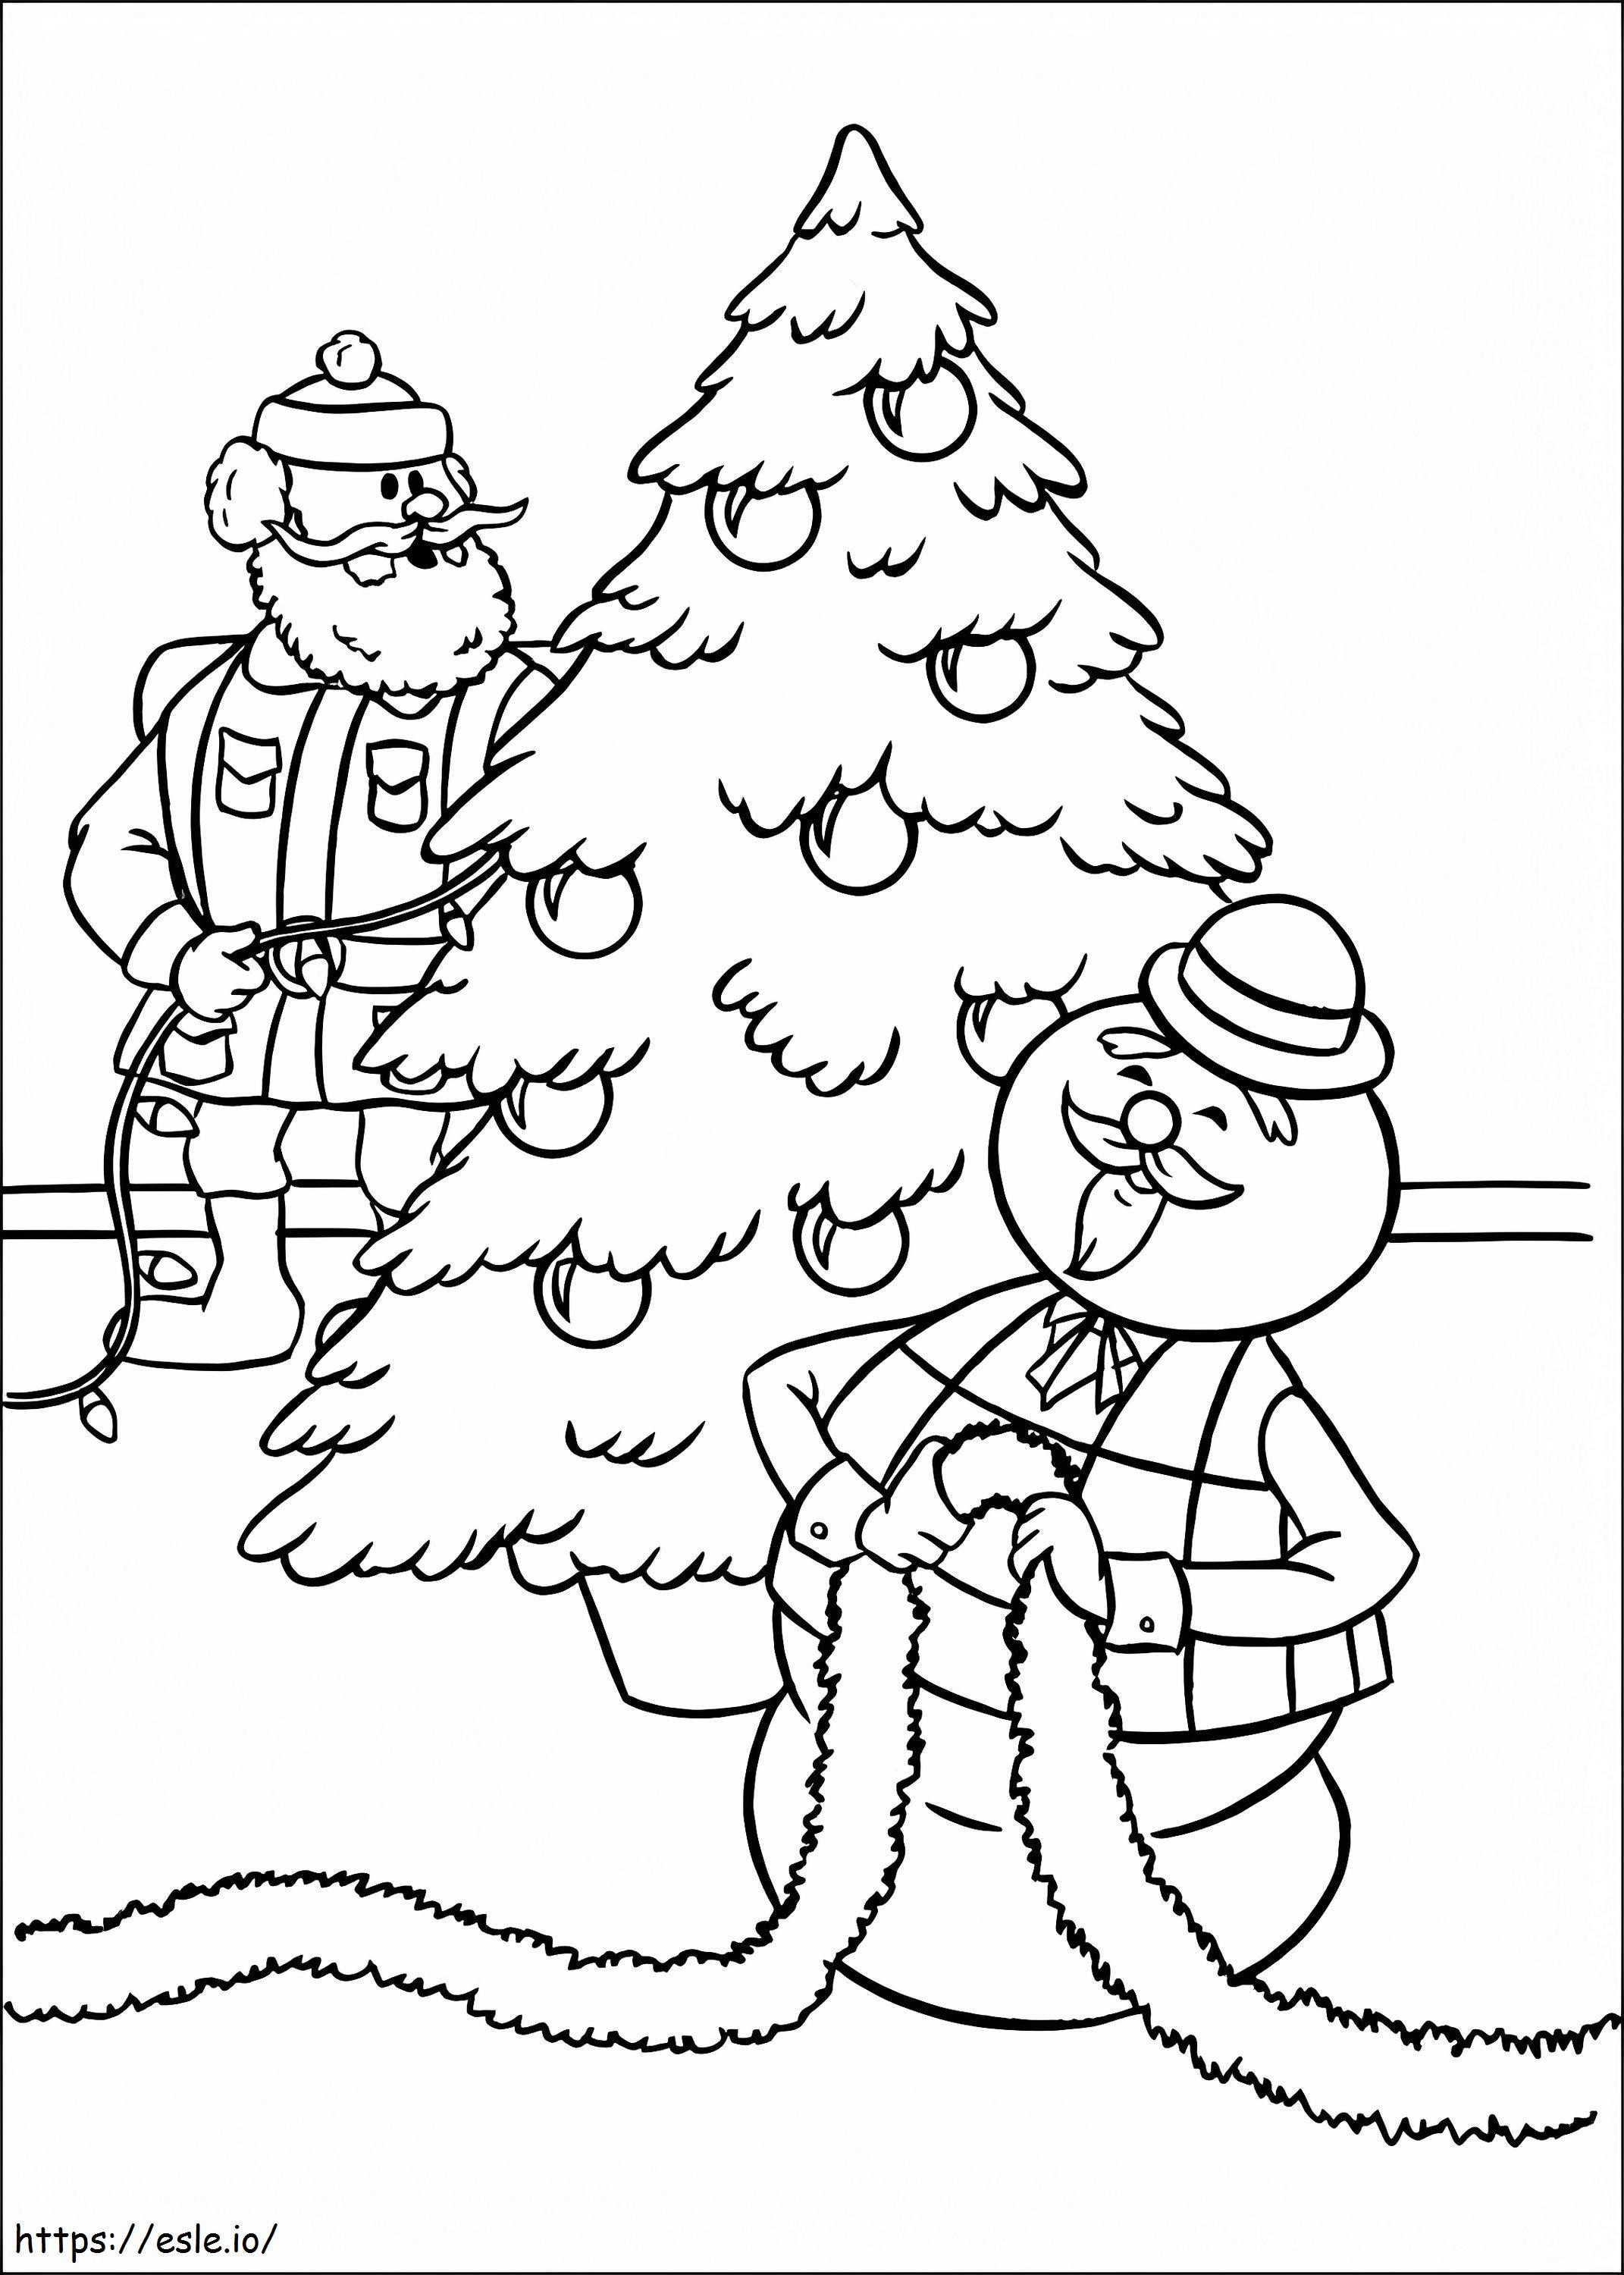 Sam The Snowman coloring page